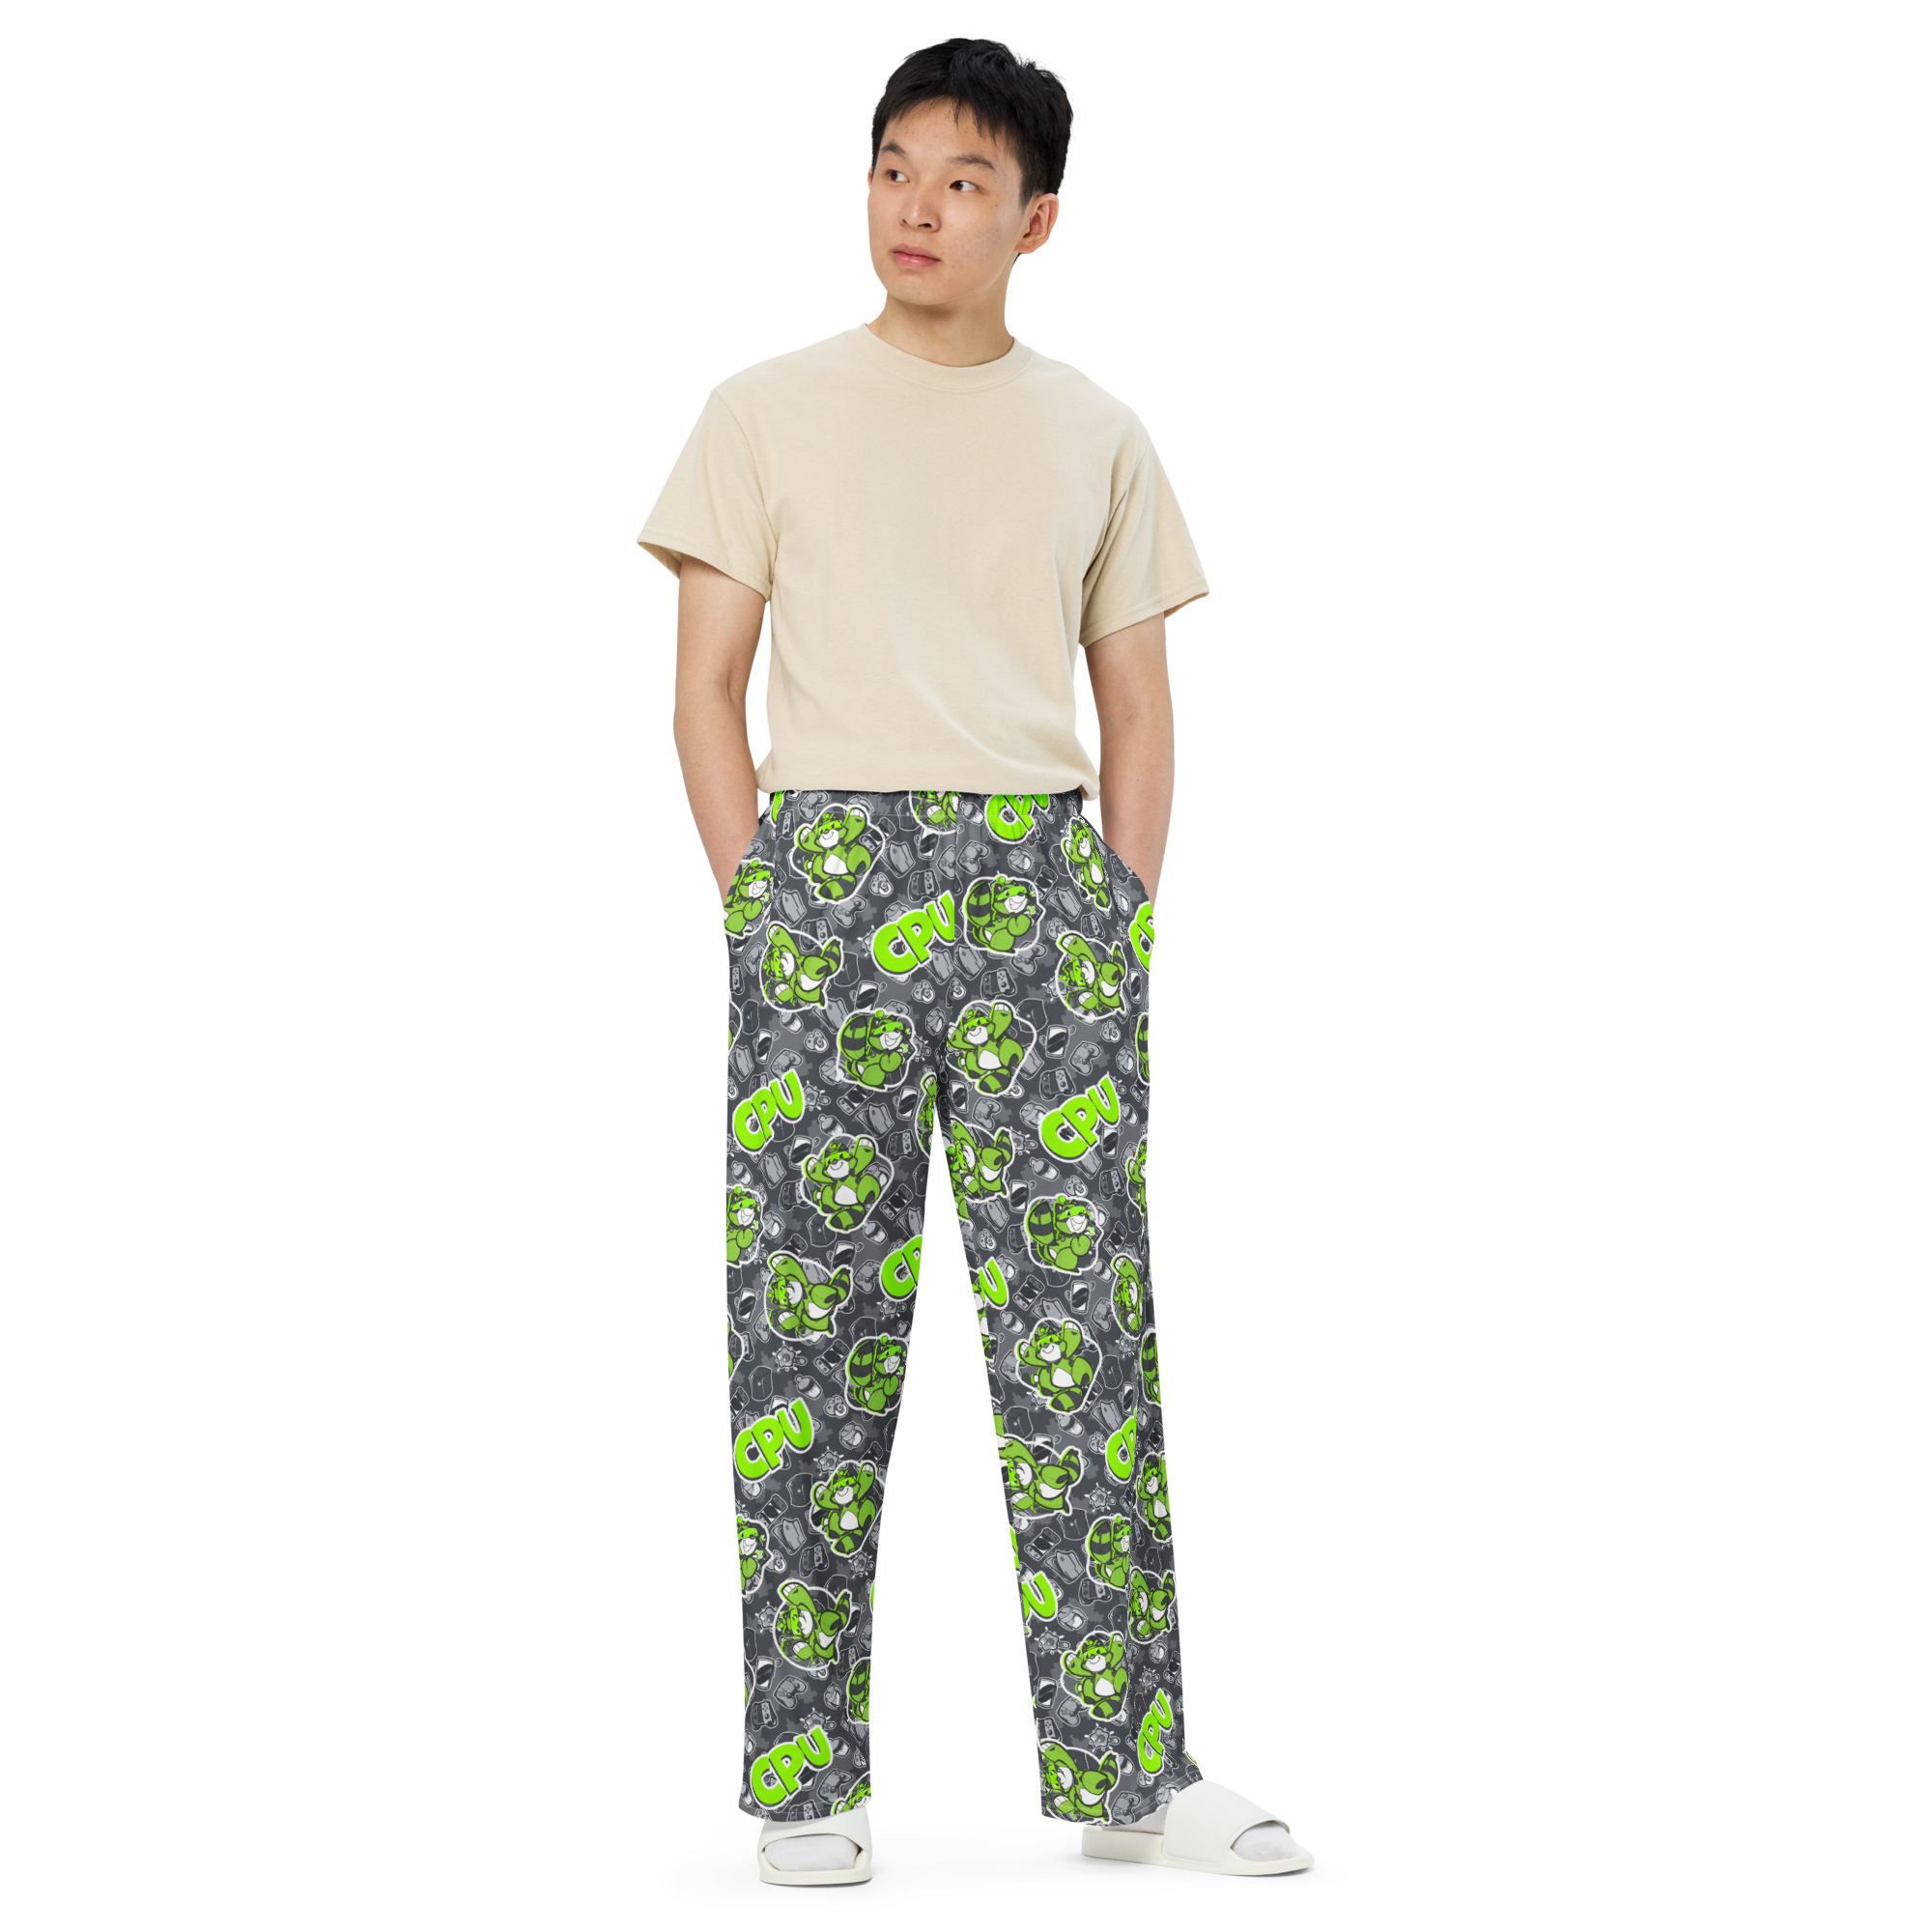 Gaming Party 2 - Relaxed Gamer Pants - #TeamTrash